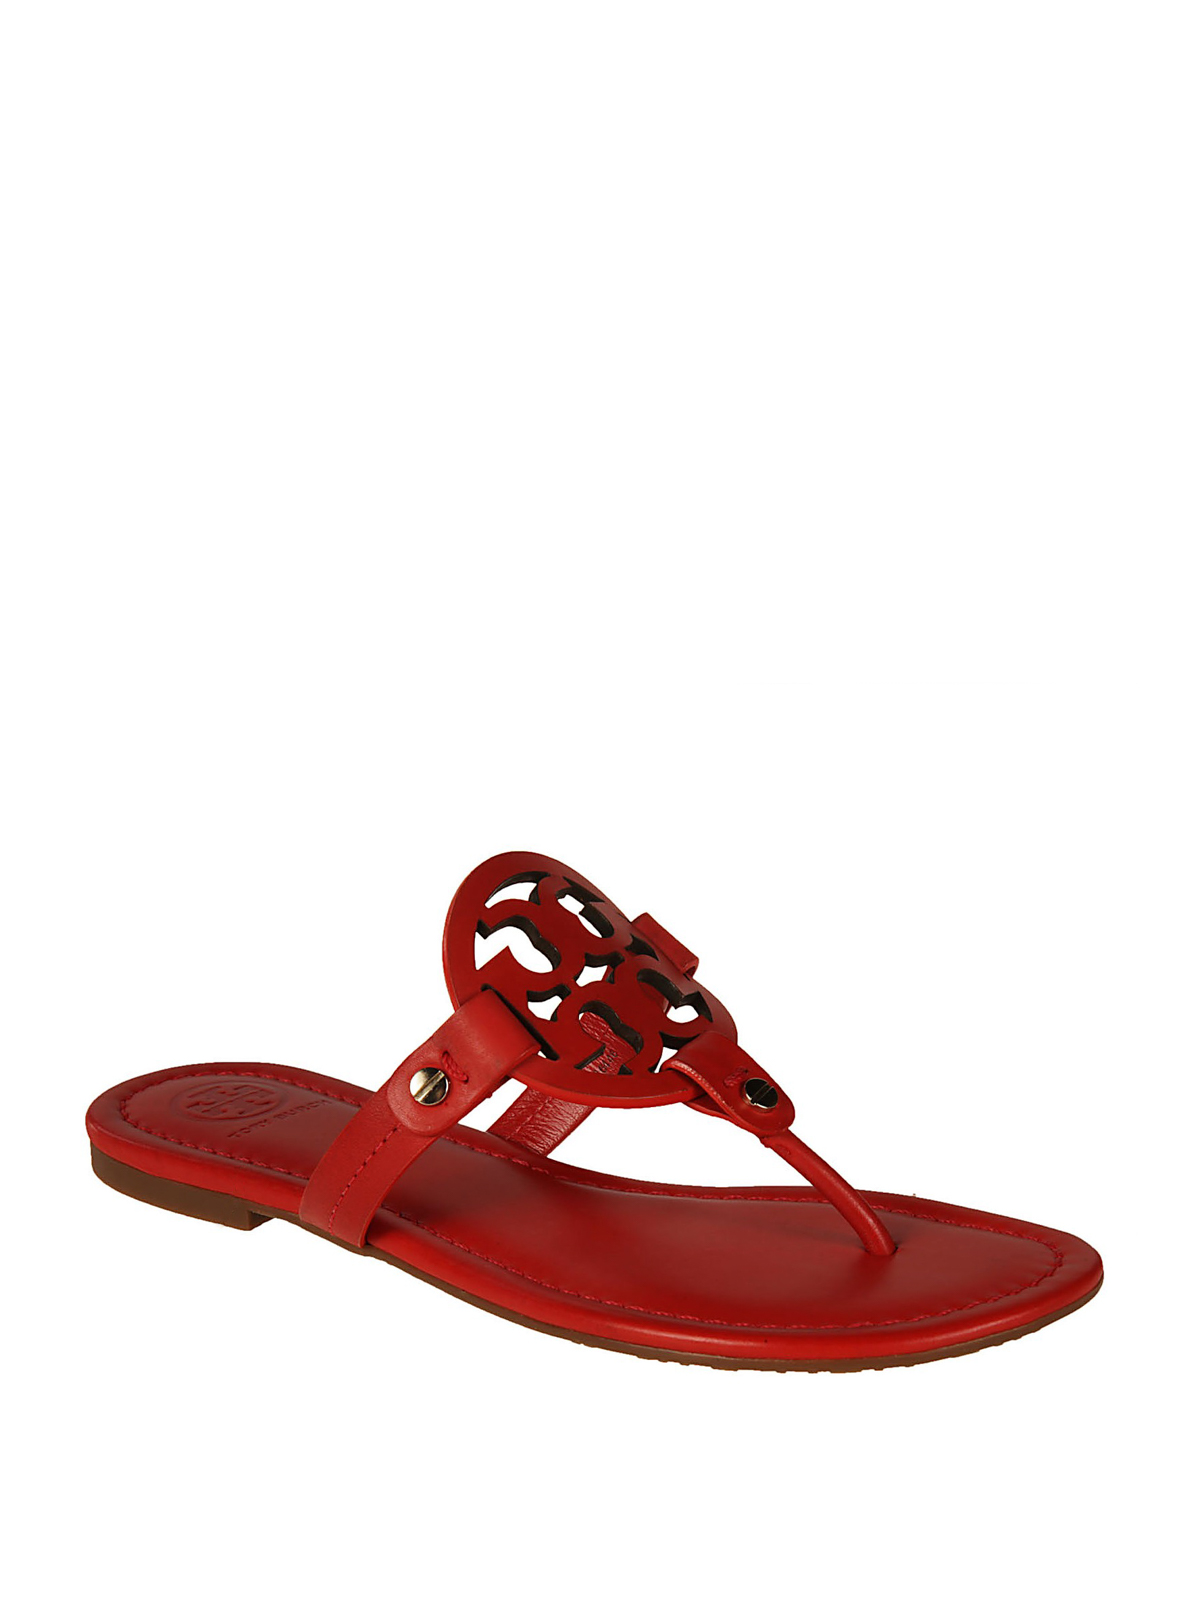 Tory Burch Sandals Red 